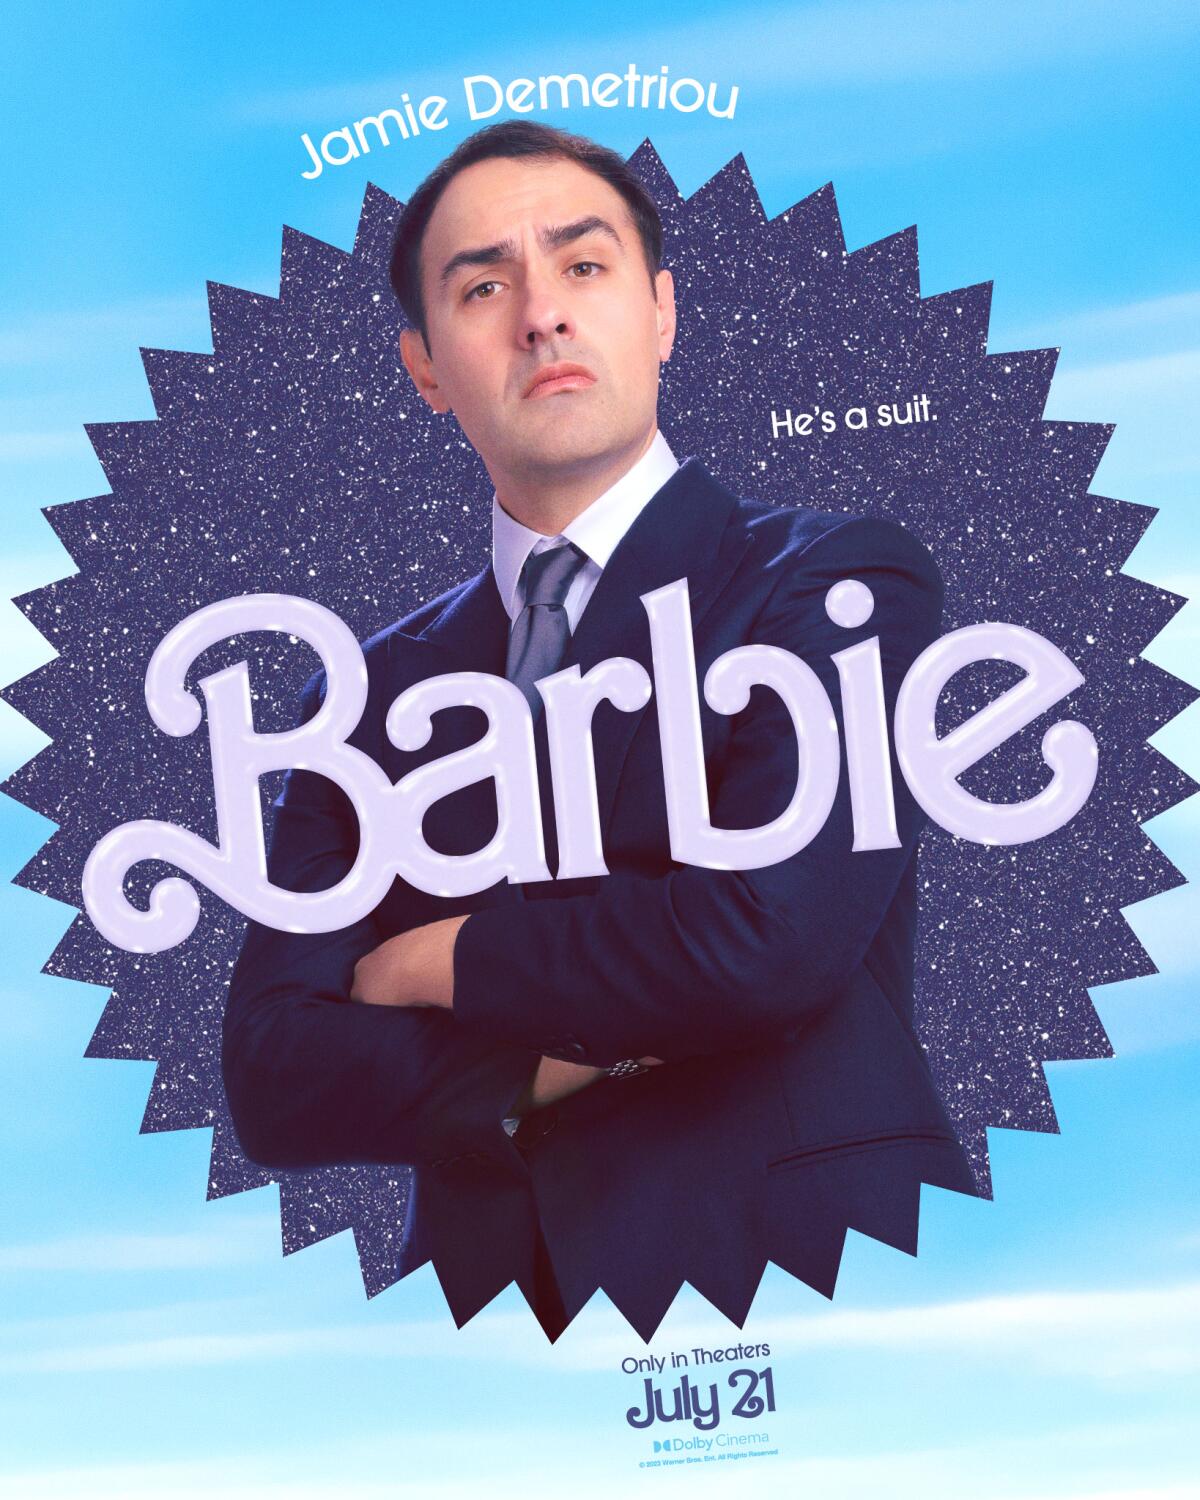 Jamie Demetriou poses with his hands on his hips in a "Barbie" movie poster. He wears a blue suit and tie.